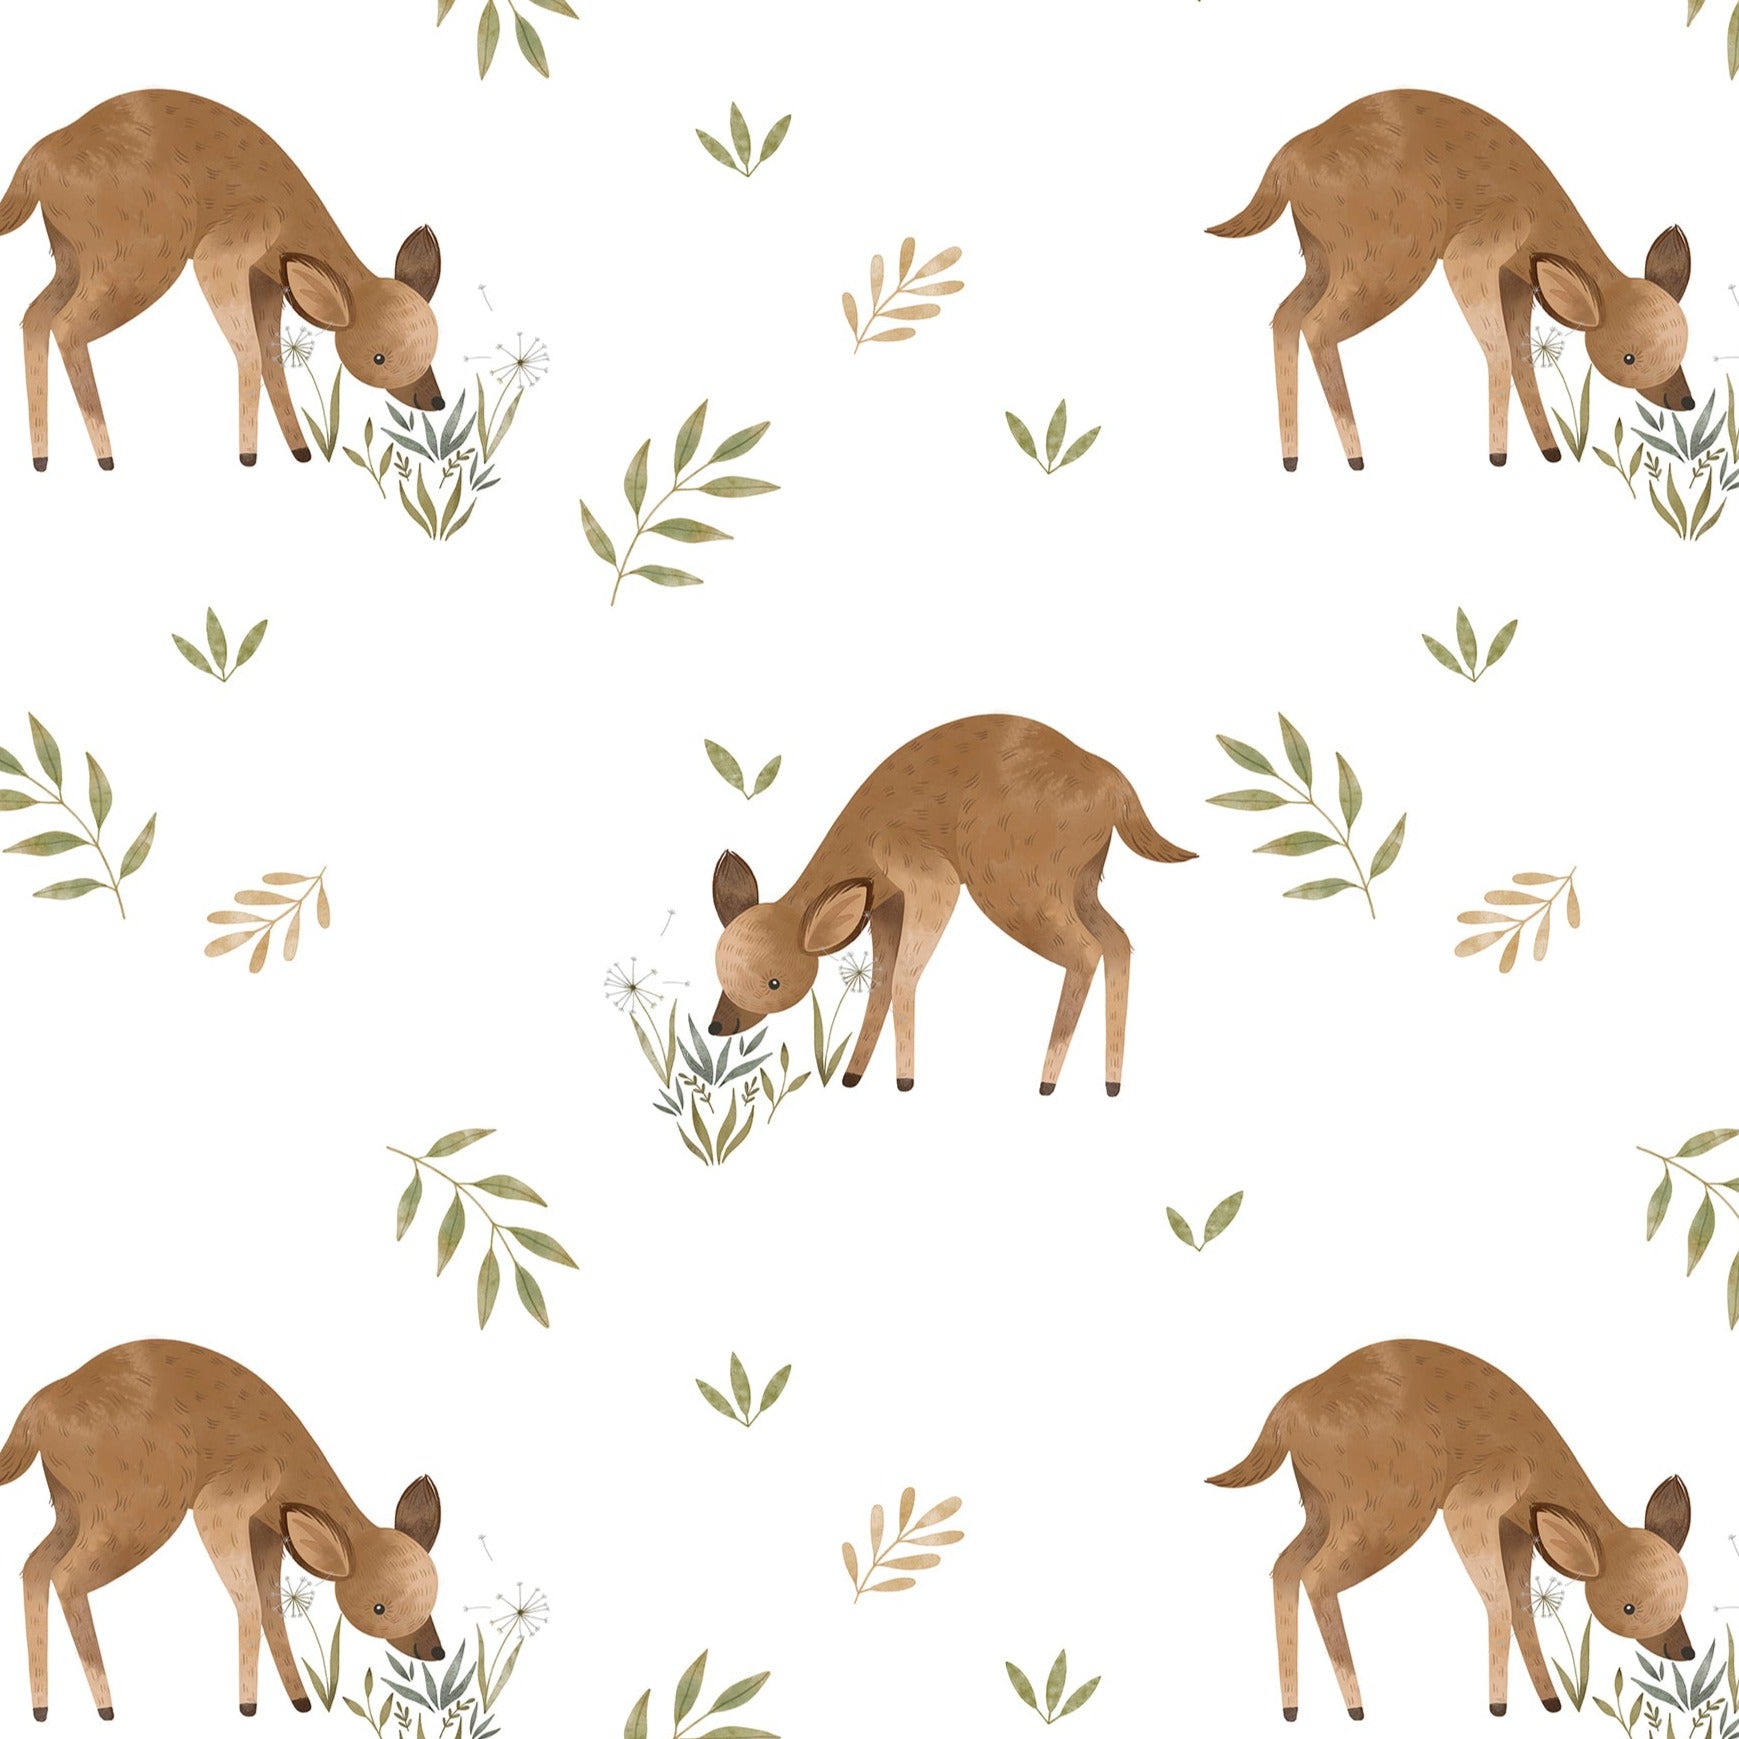 Close-up of Forest Fawn Wallpaper featuring charming illustrations of young fawns grazing among small flowers and green leaves on a clean white background, perfect for adding a serene touch to any room